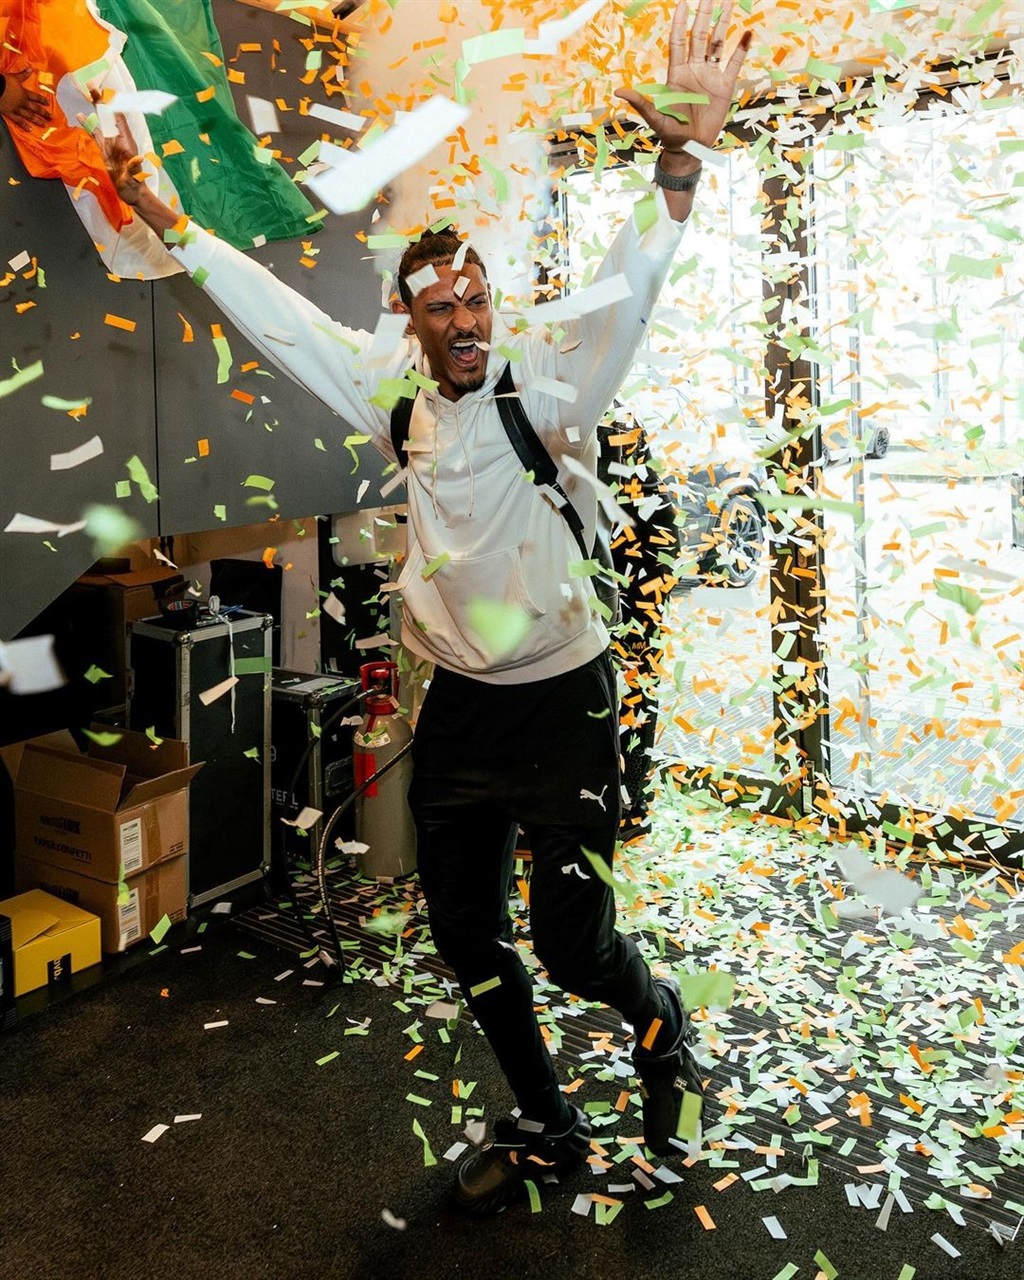 Ivorian striker Sébastien Haller received a truly memorable welcome back to Borussia Dortmund's training base after helping his country win their third Africa Cup of Nations crown.